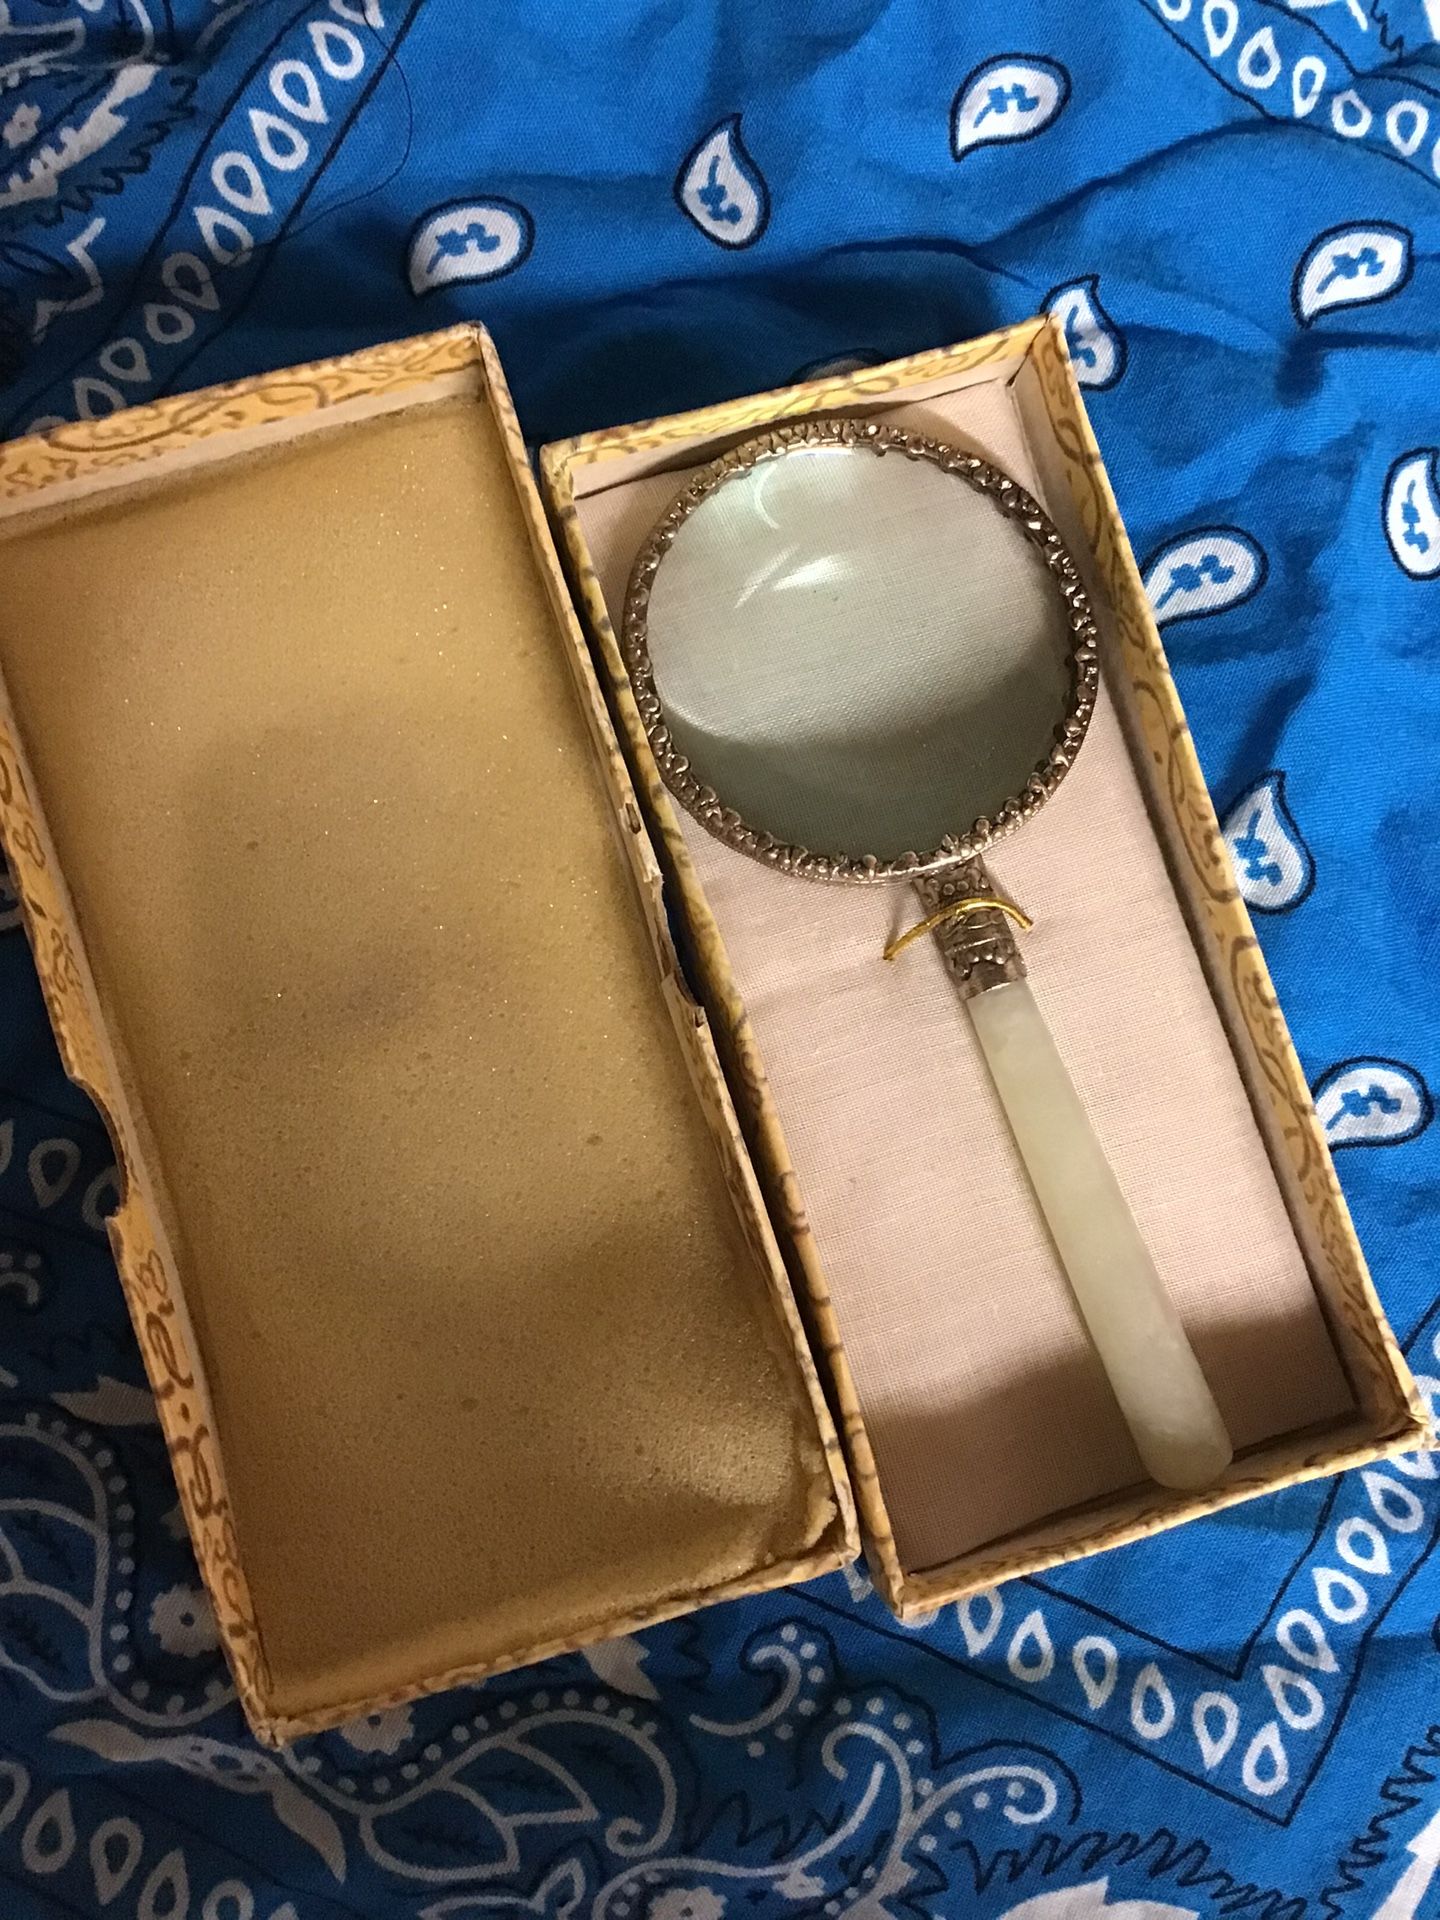 Antique Magnifying Glass 